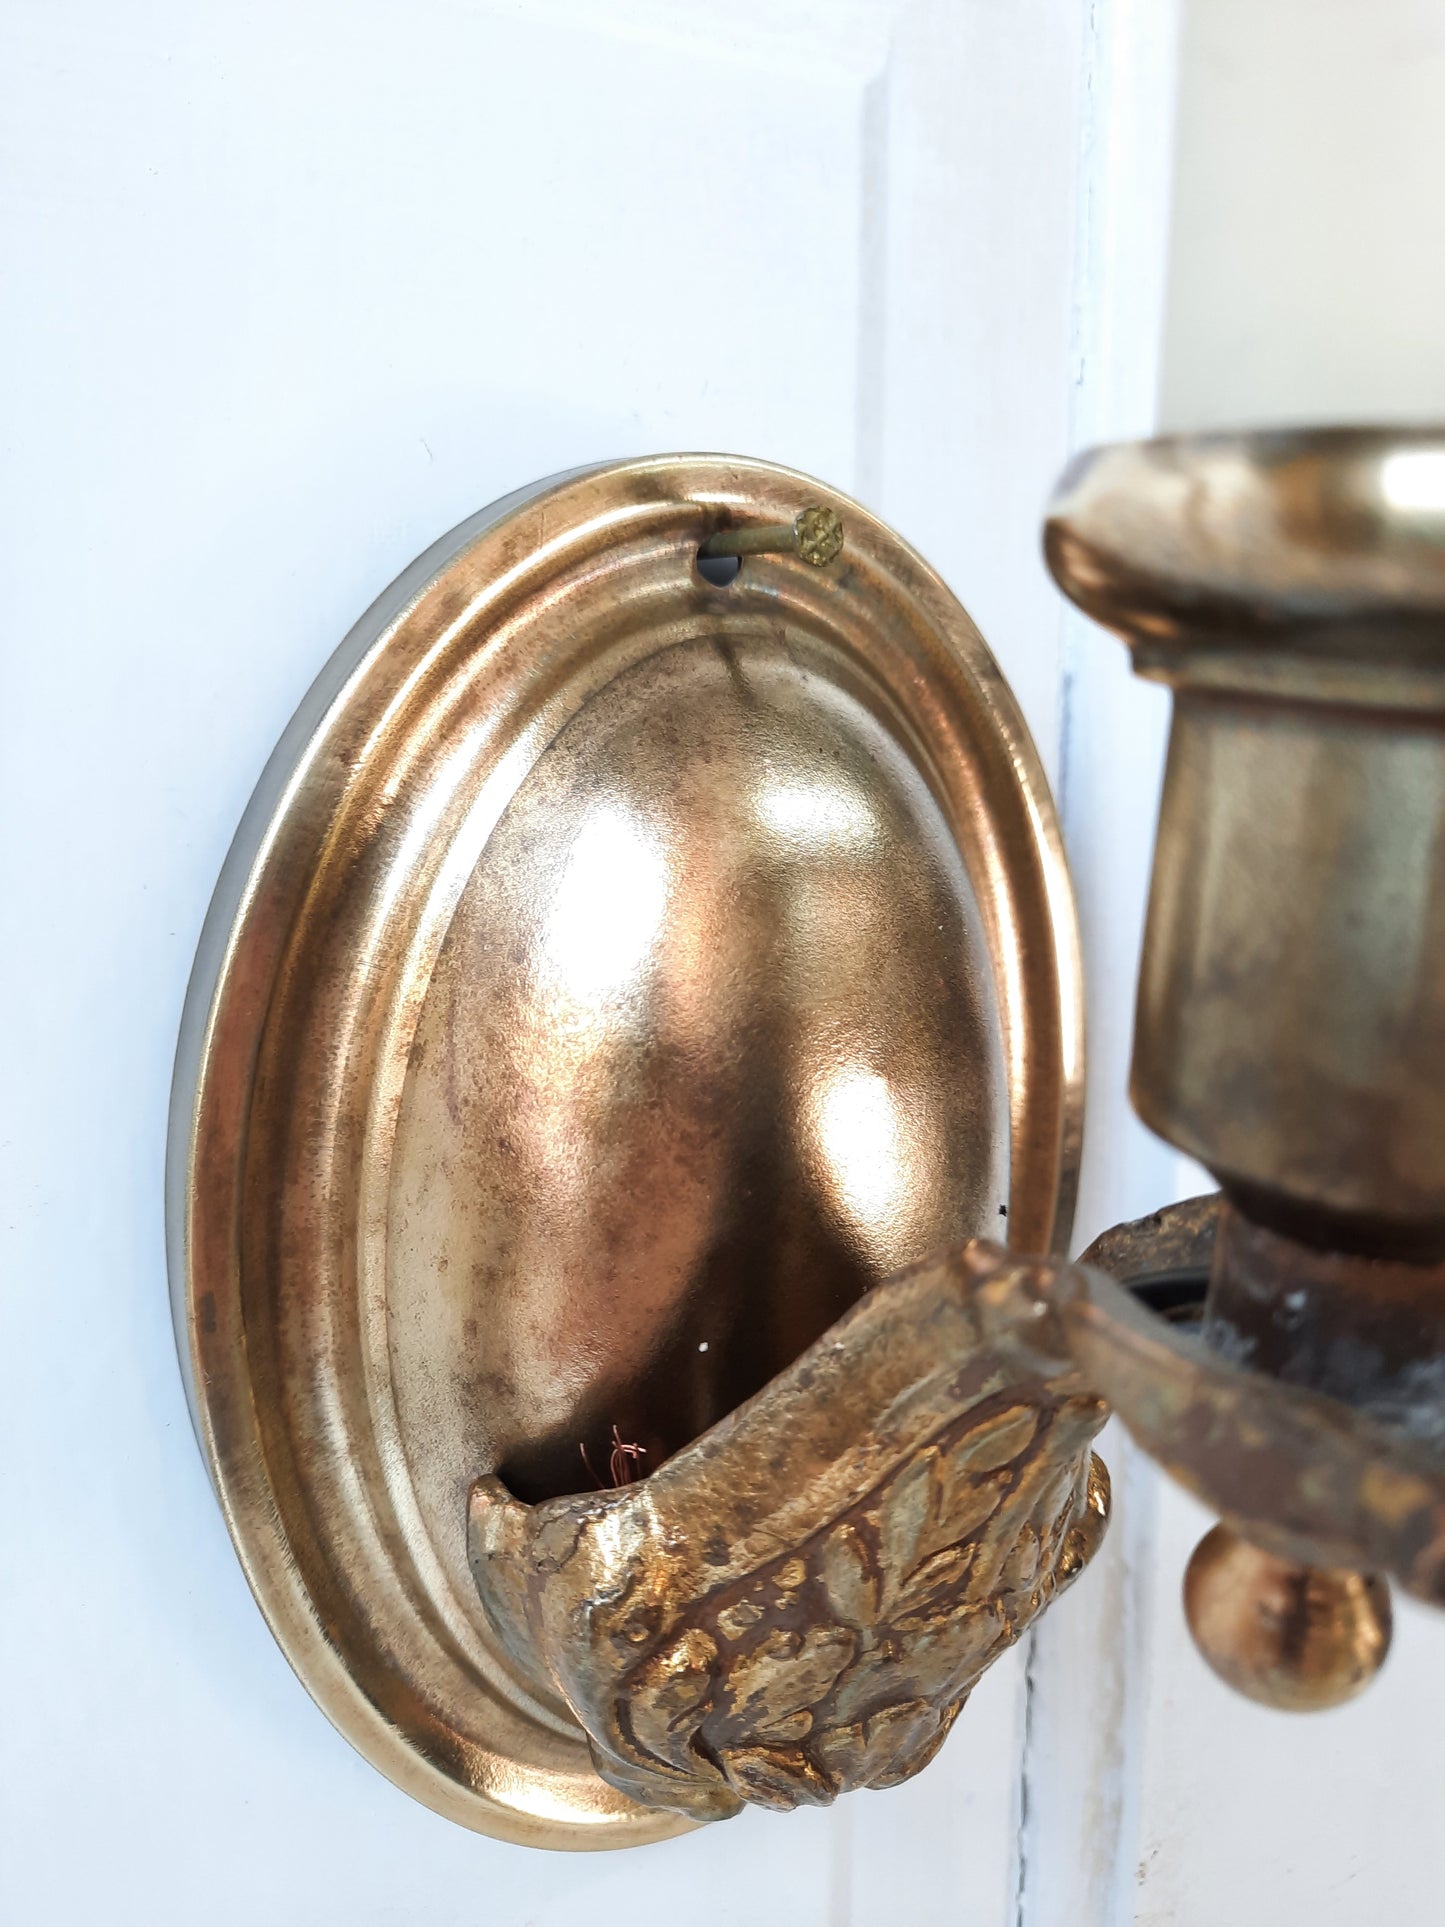 Pair of Vintage Brass Sconces, Two Antique Wall Sconce Lights with Candle Sockets 020806